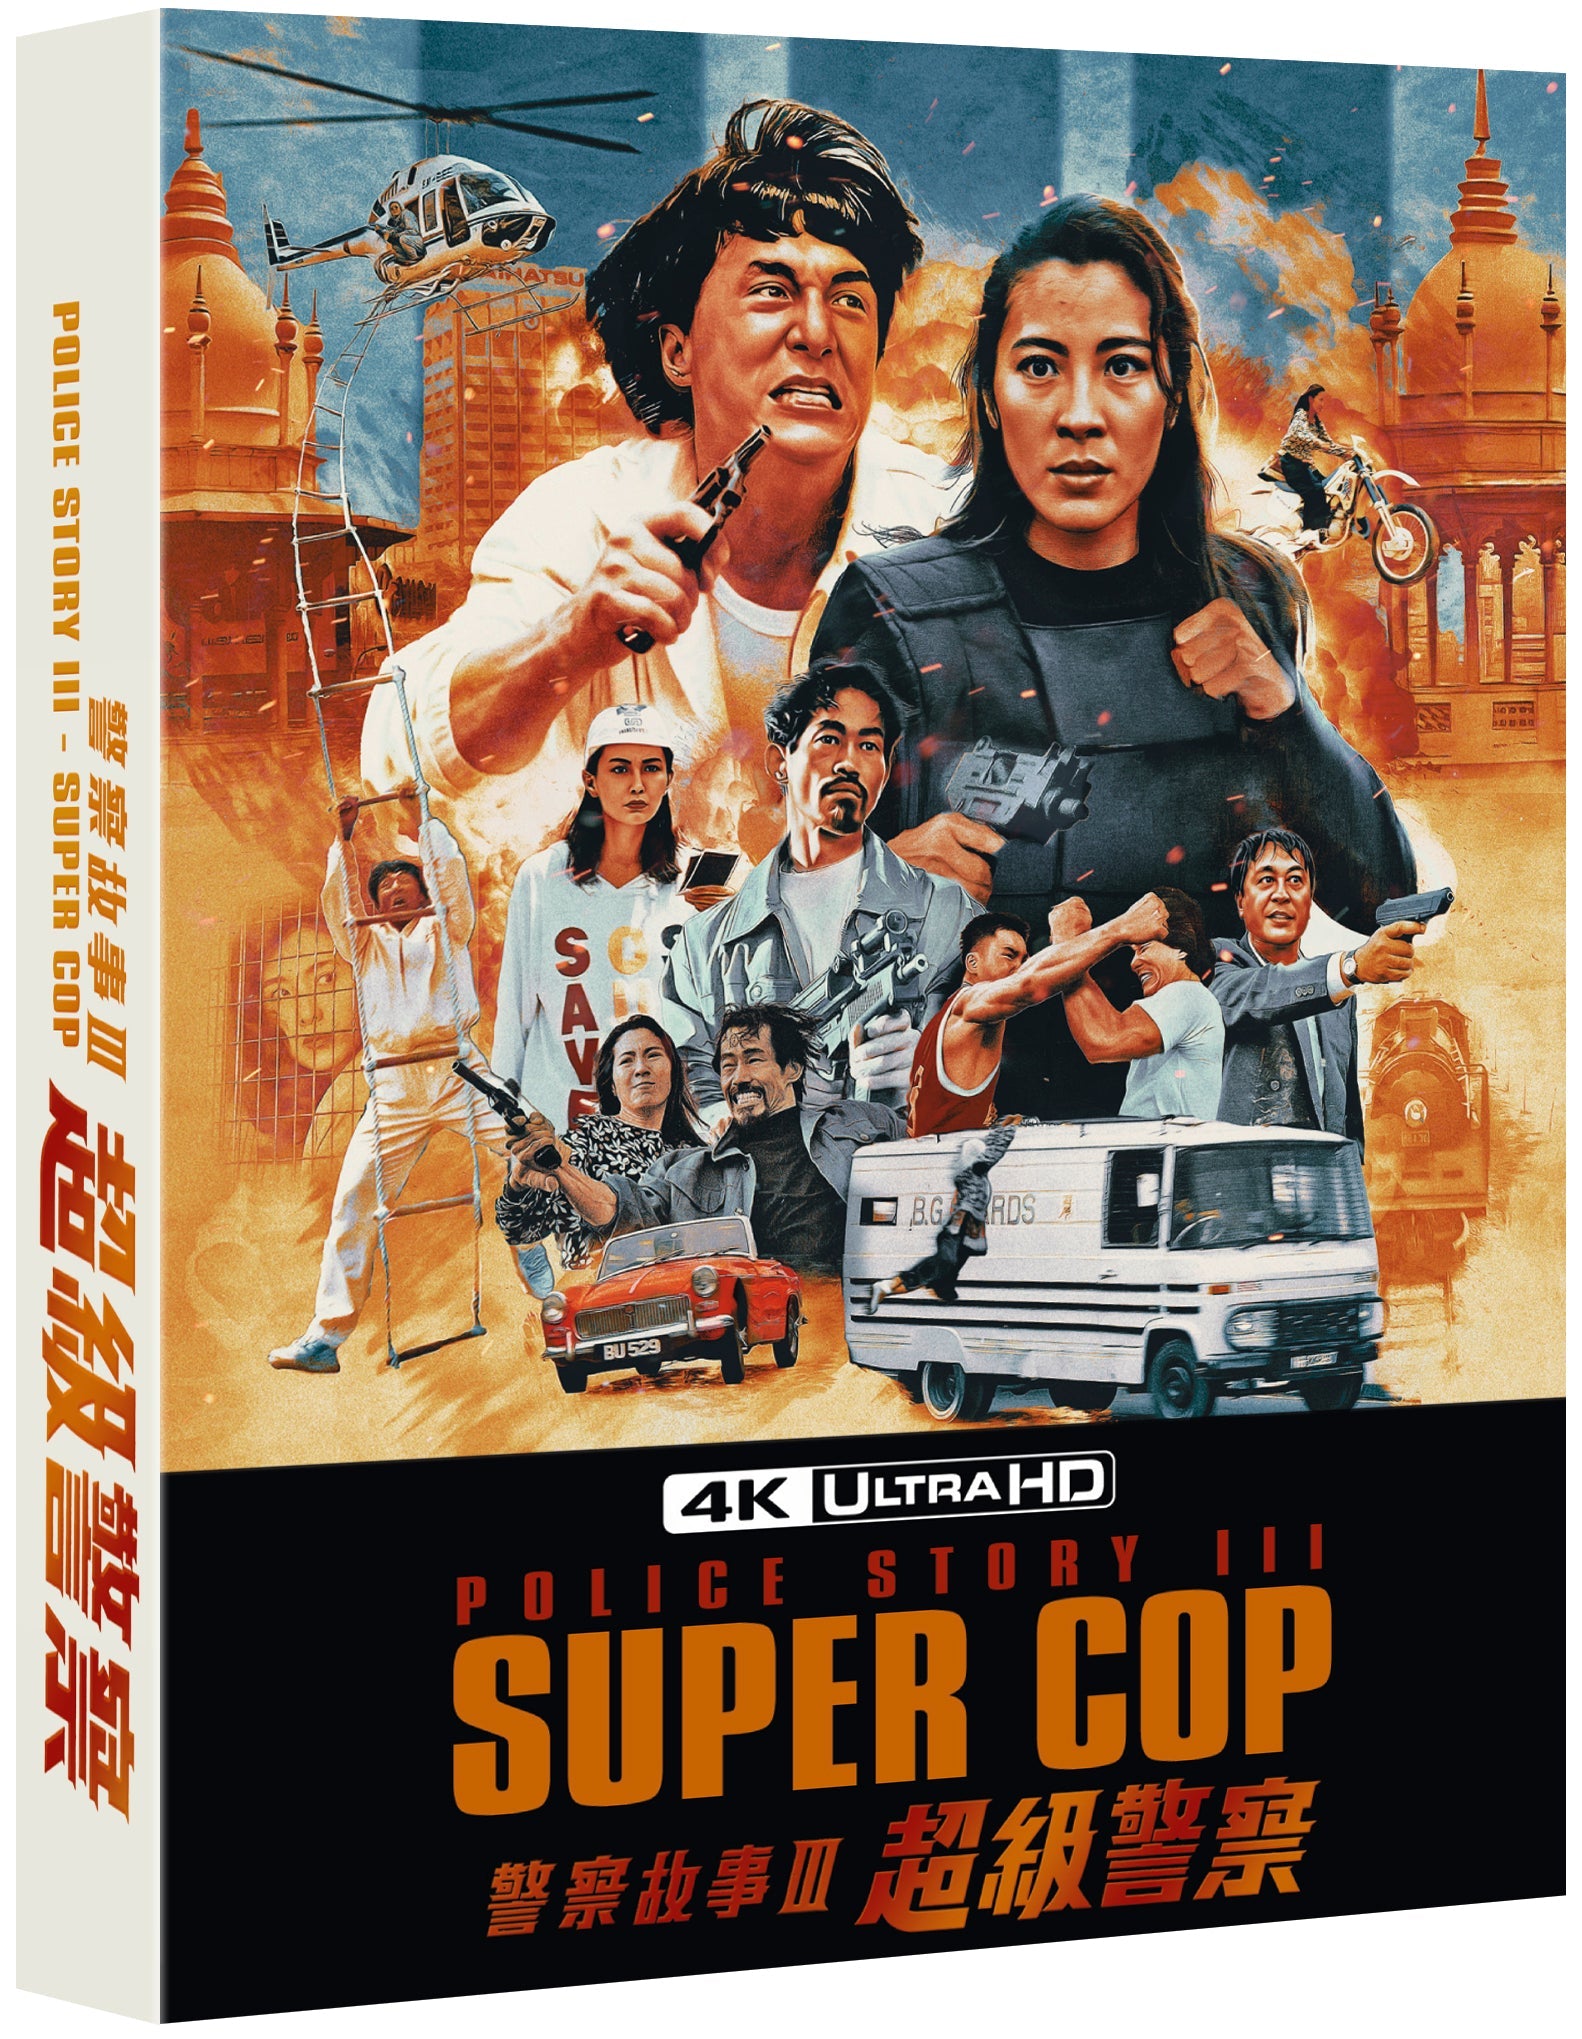 Police Story 3 : Super Cop